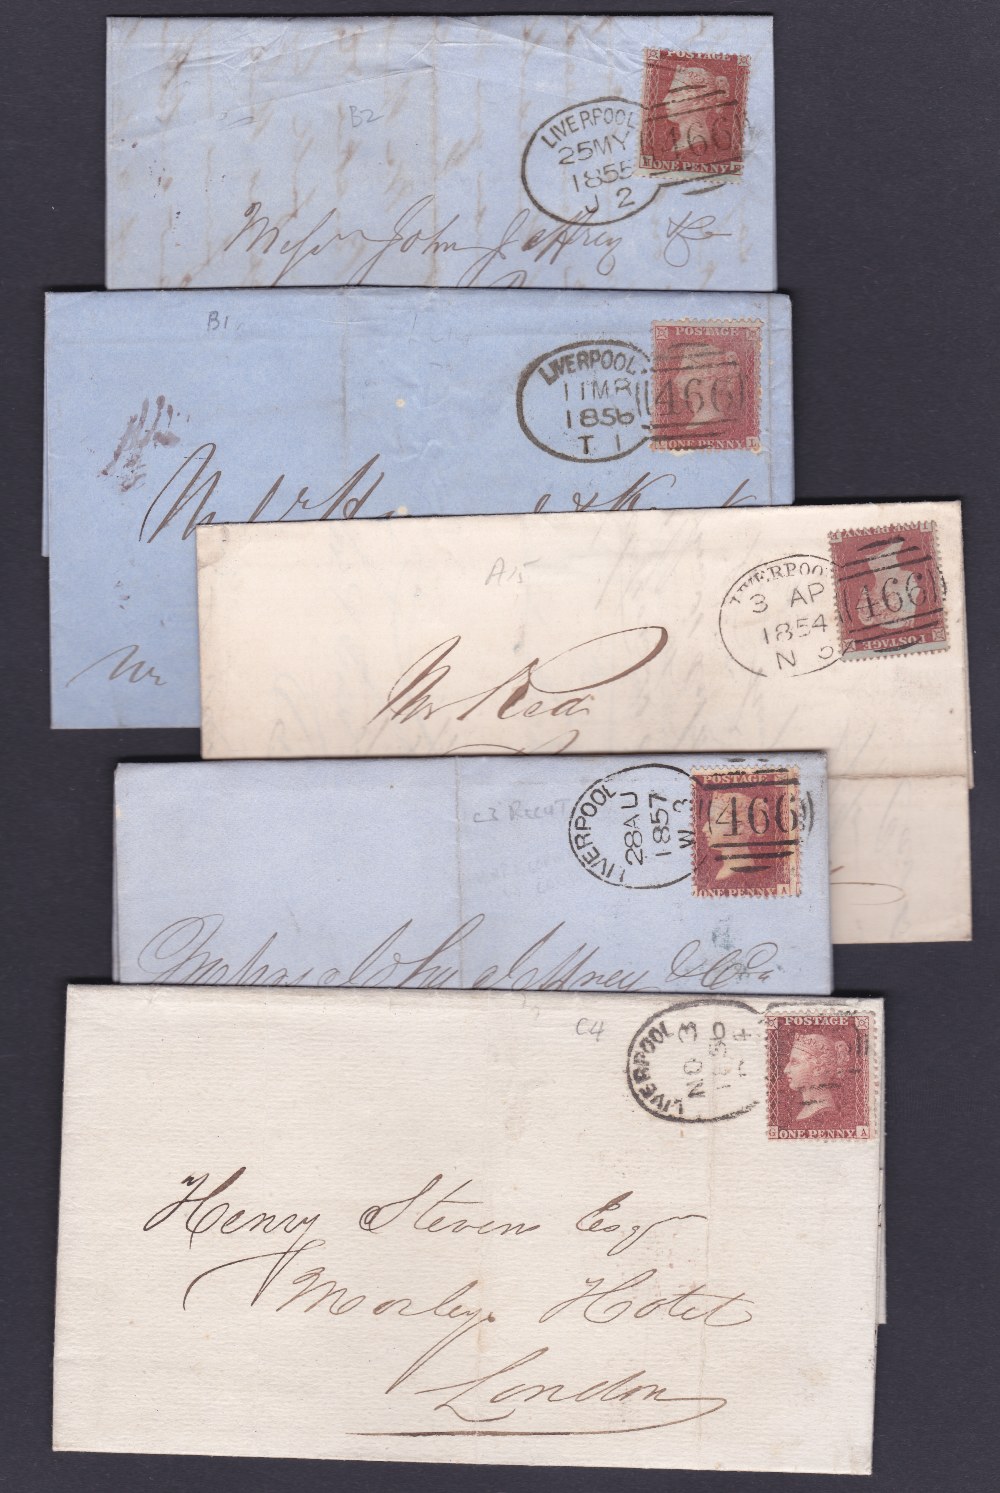 POSTAL HISTORY : 1850's LIVERPOOL Spoons on penny red star covers (5)